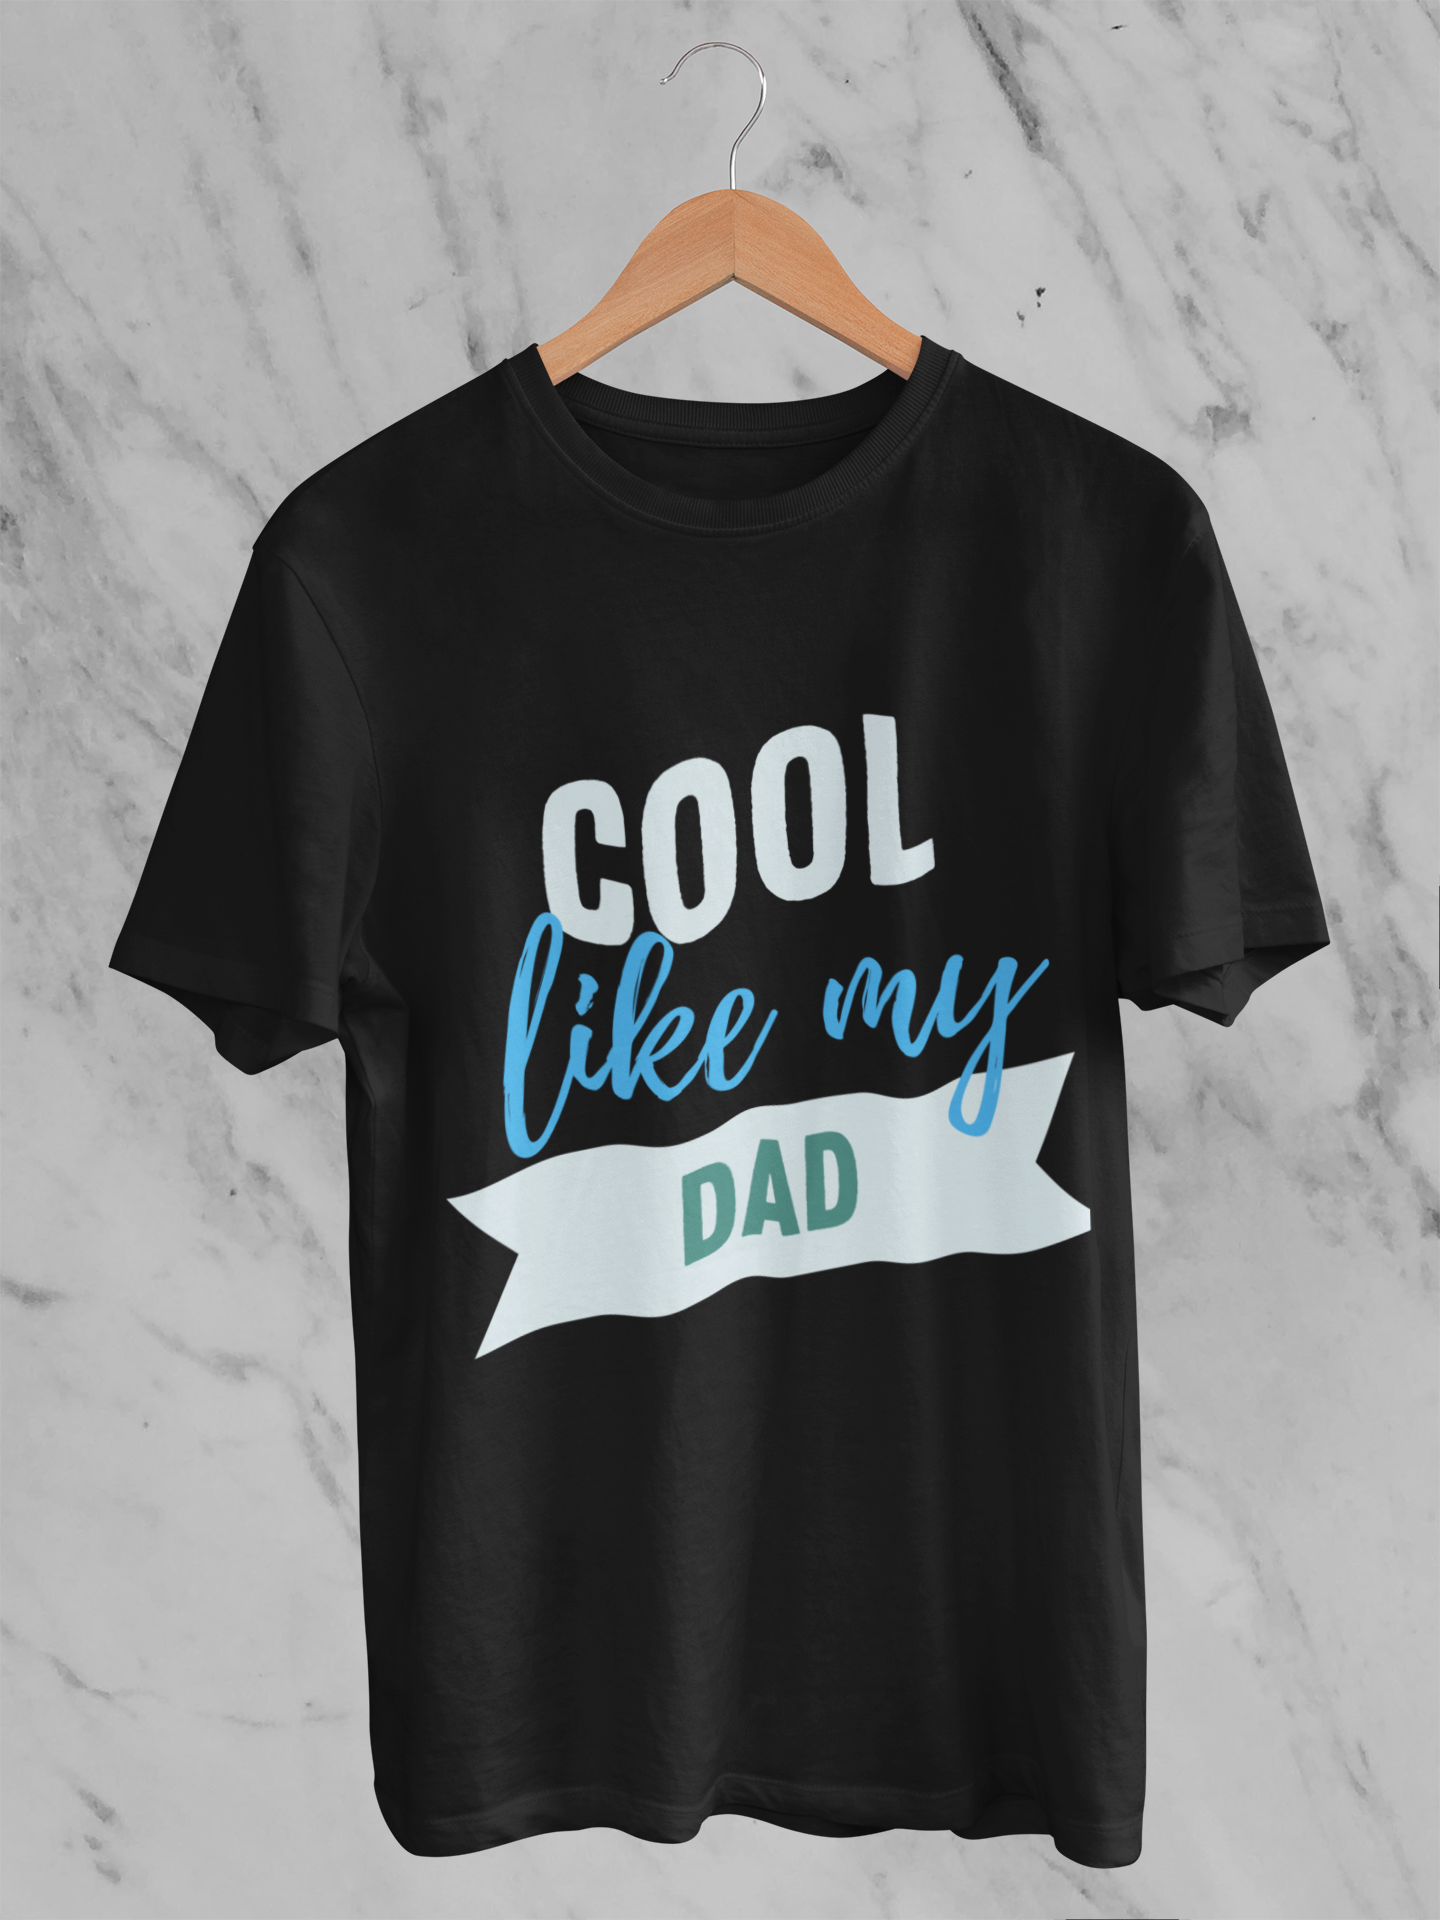 Cool Like My DAD Cotton T-Shirt